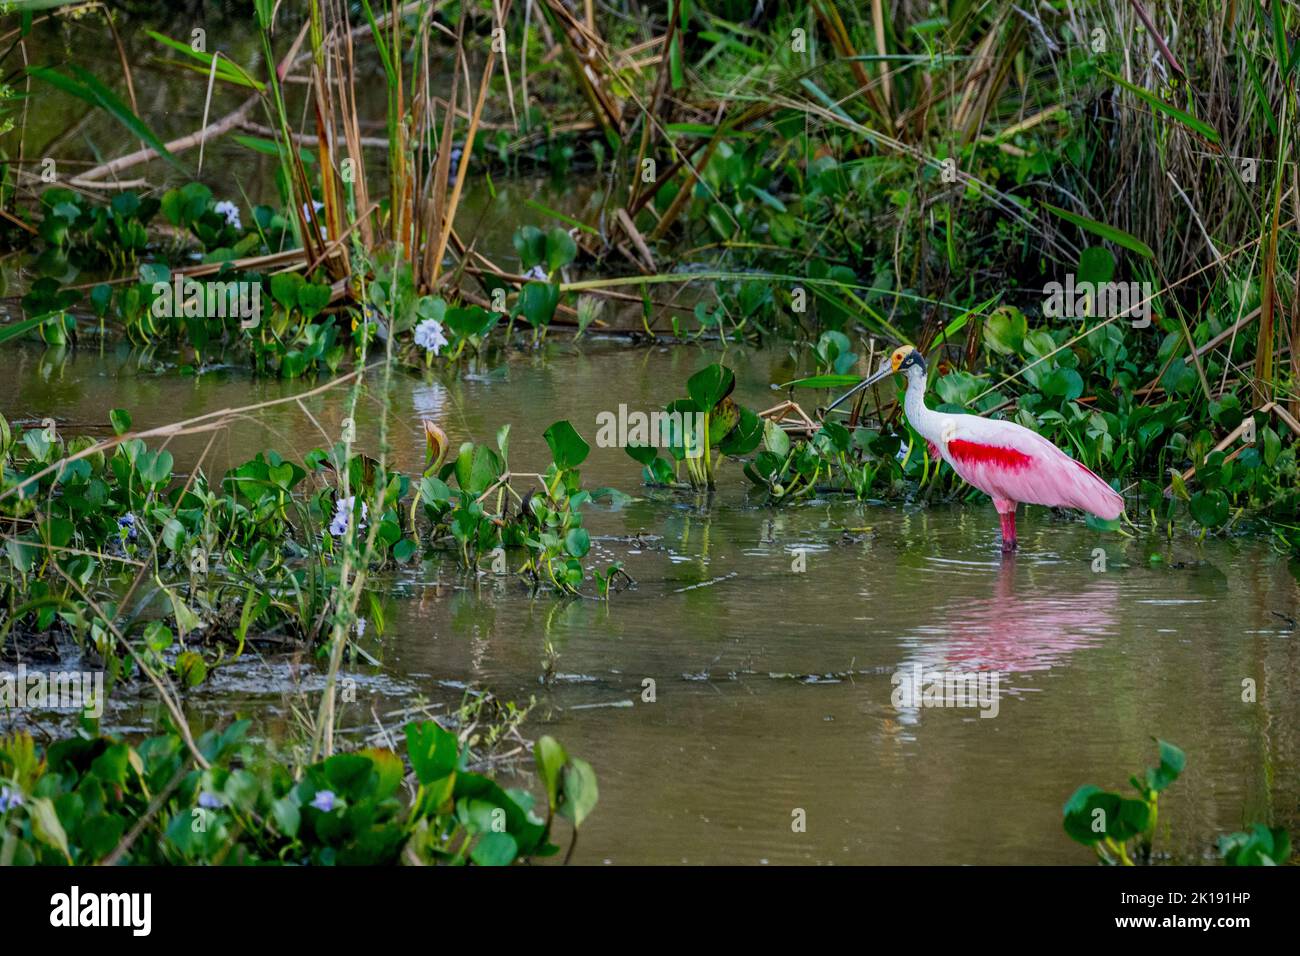 A Roseate spoonbill (Platalea ajaja) in a wetland near the Aymara Lodge in the Northern Pantanal, State of Mato Grosso, Brazil. Stock Photo